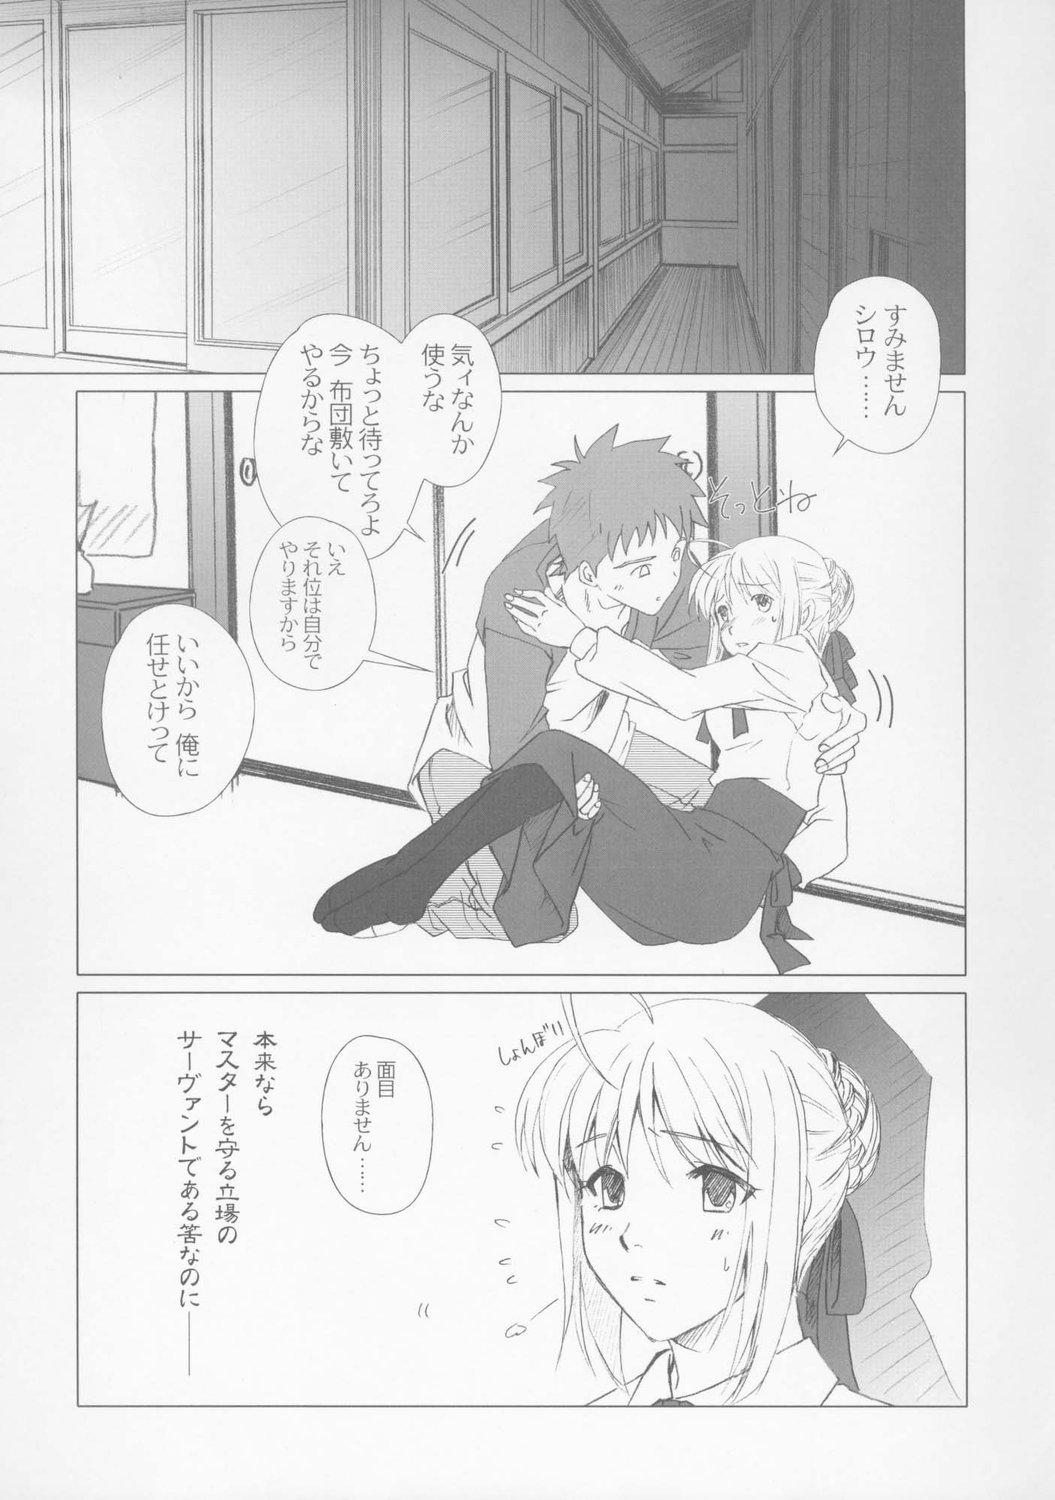 Missionary Eien no Uta - Ever Song - Fate stay night Fate hollow ataraxia Cavalgando - Page 7